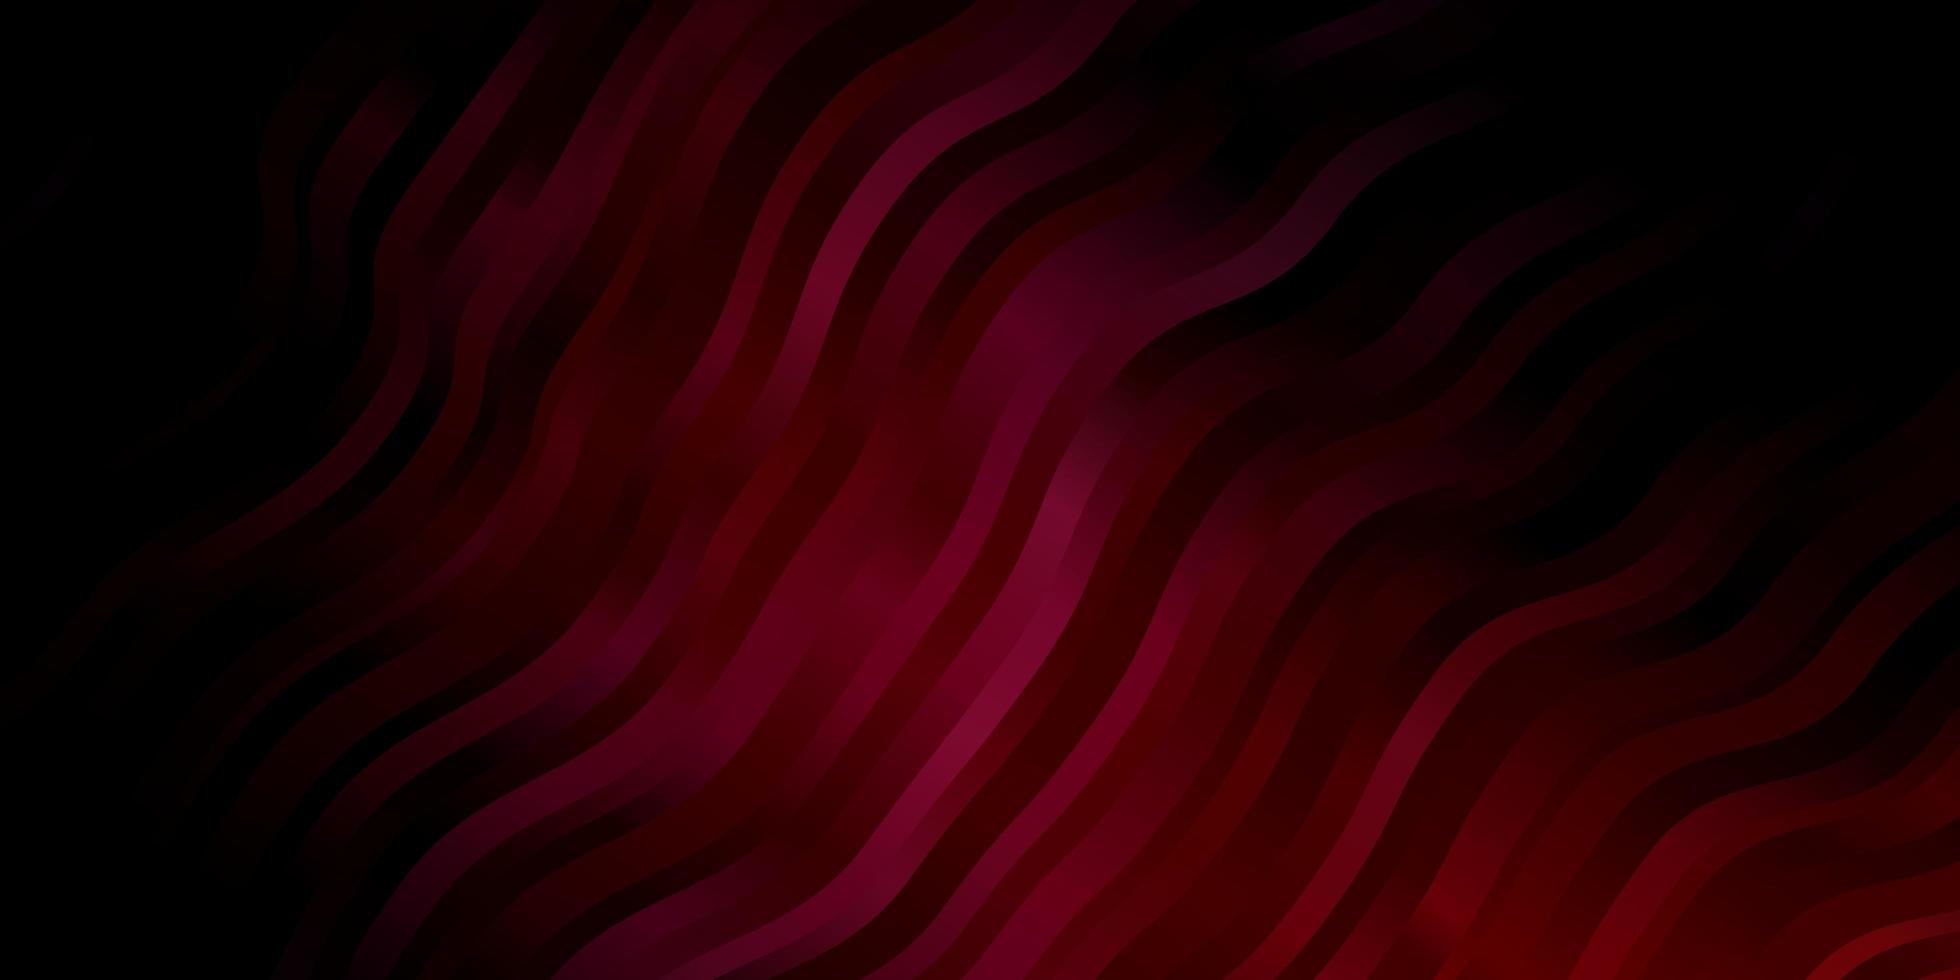 Dark Pink vector pattern with lines Colorful illustration with curved lines Pattern for ads commercials